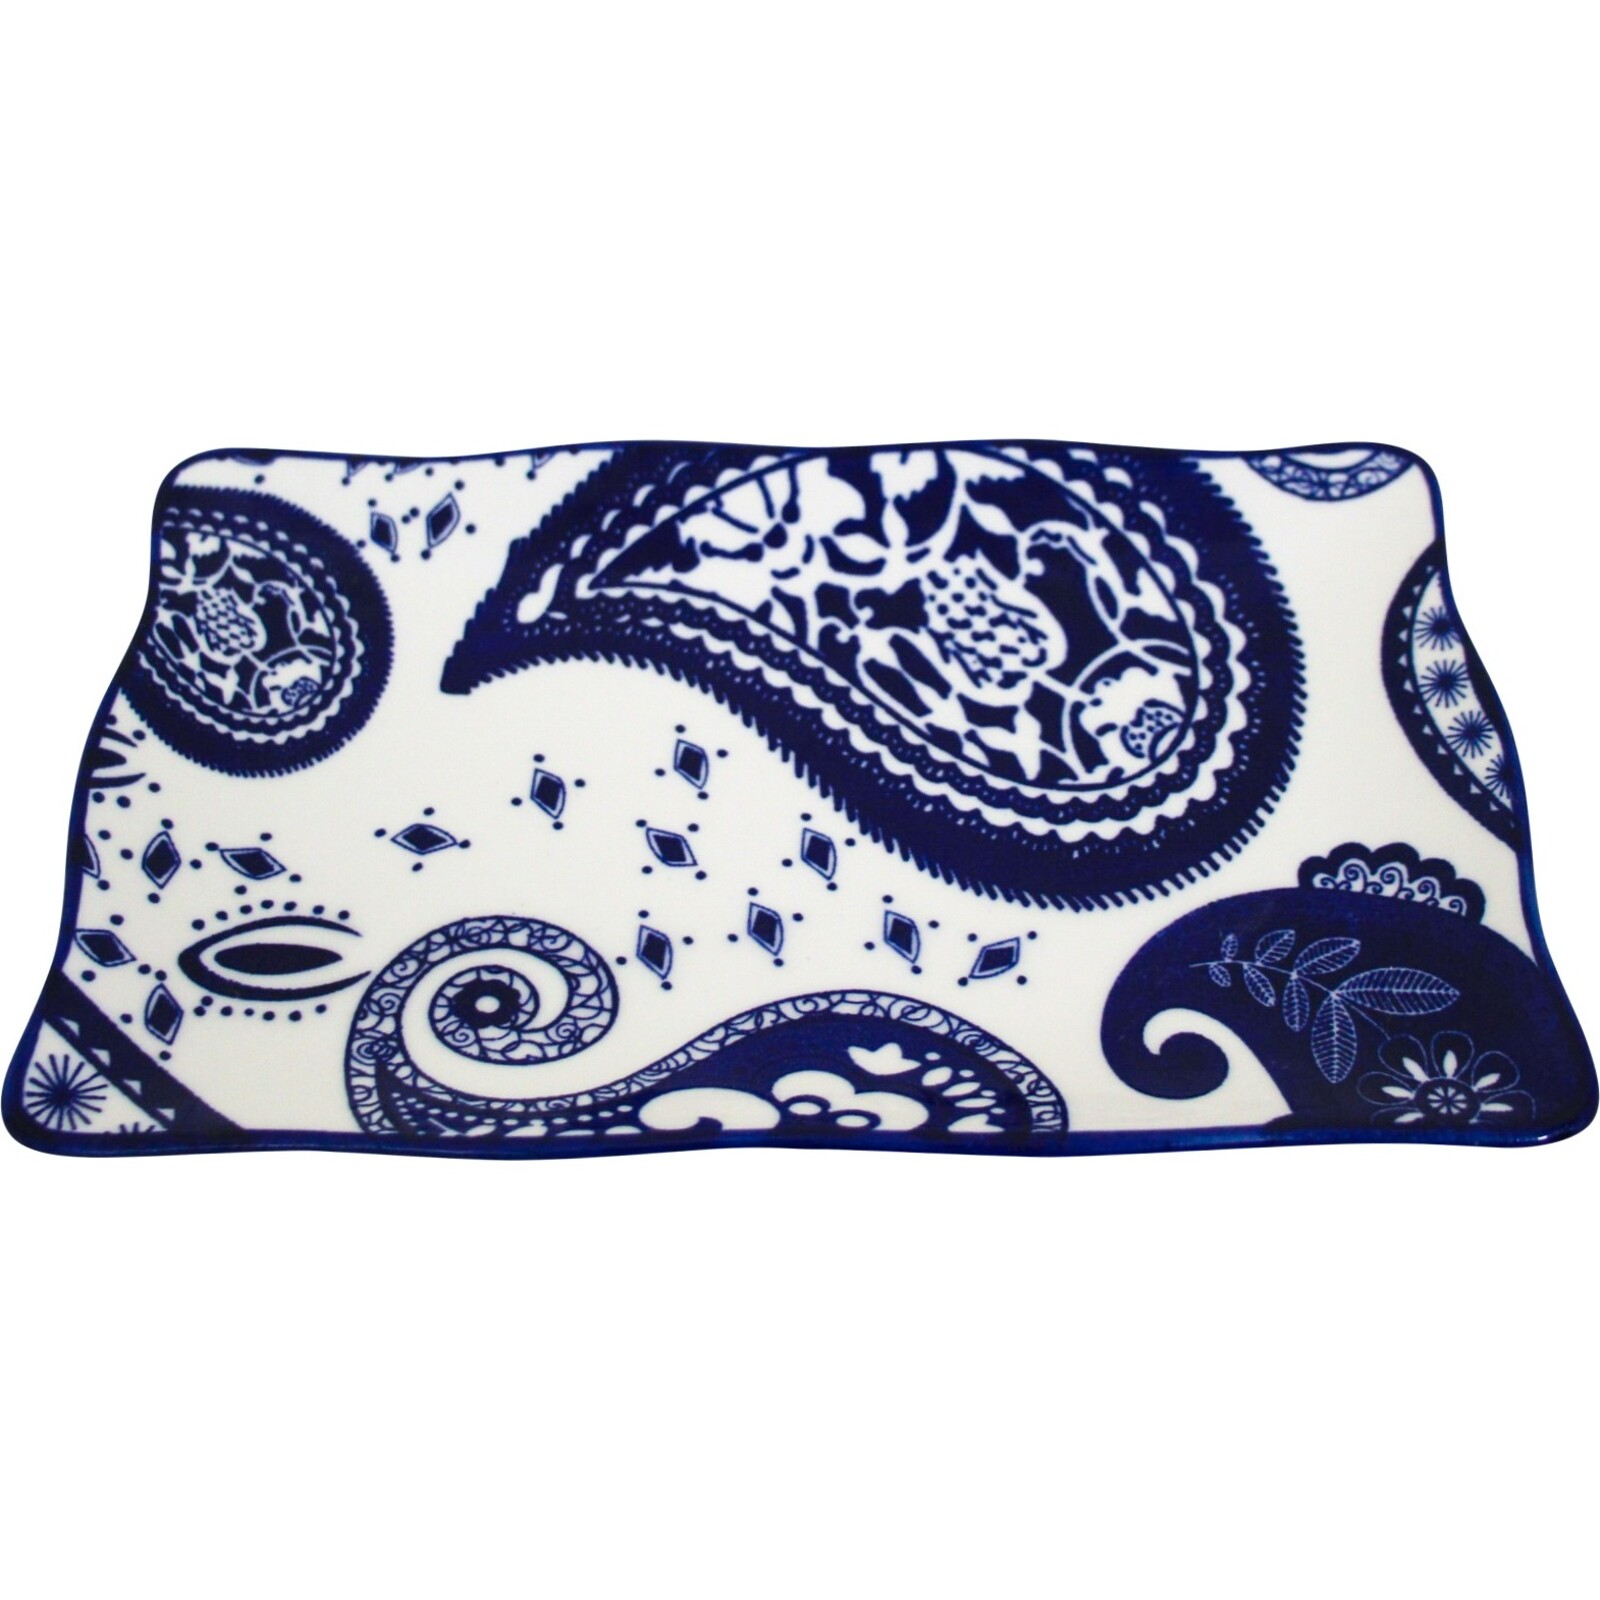 Plate Rect Blue Paisley